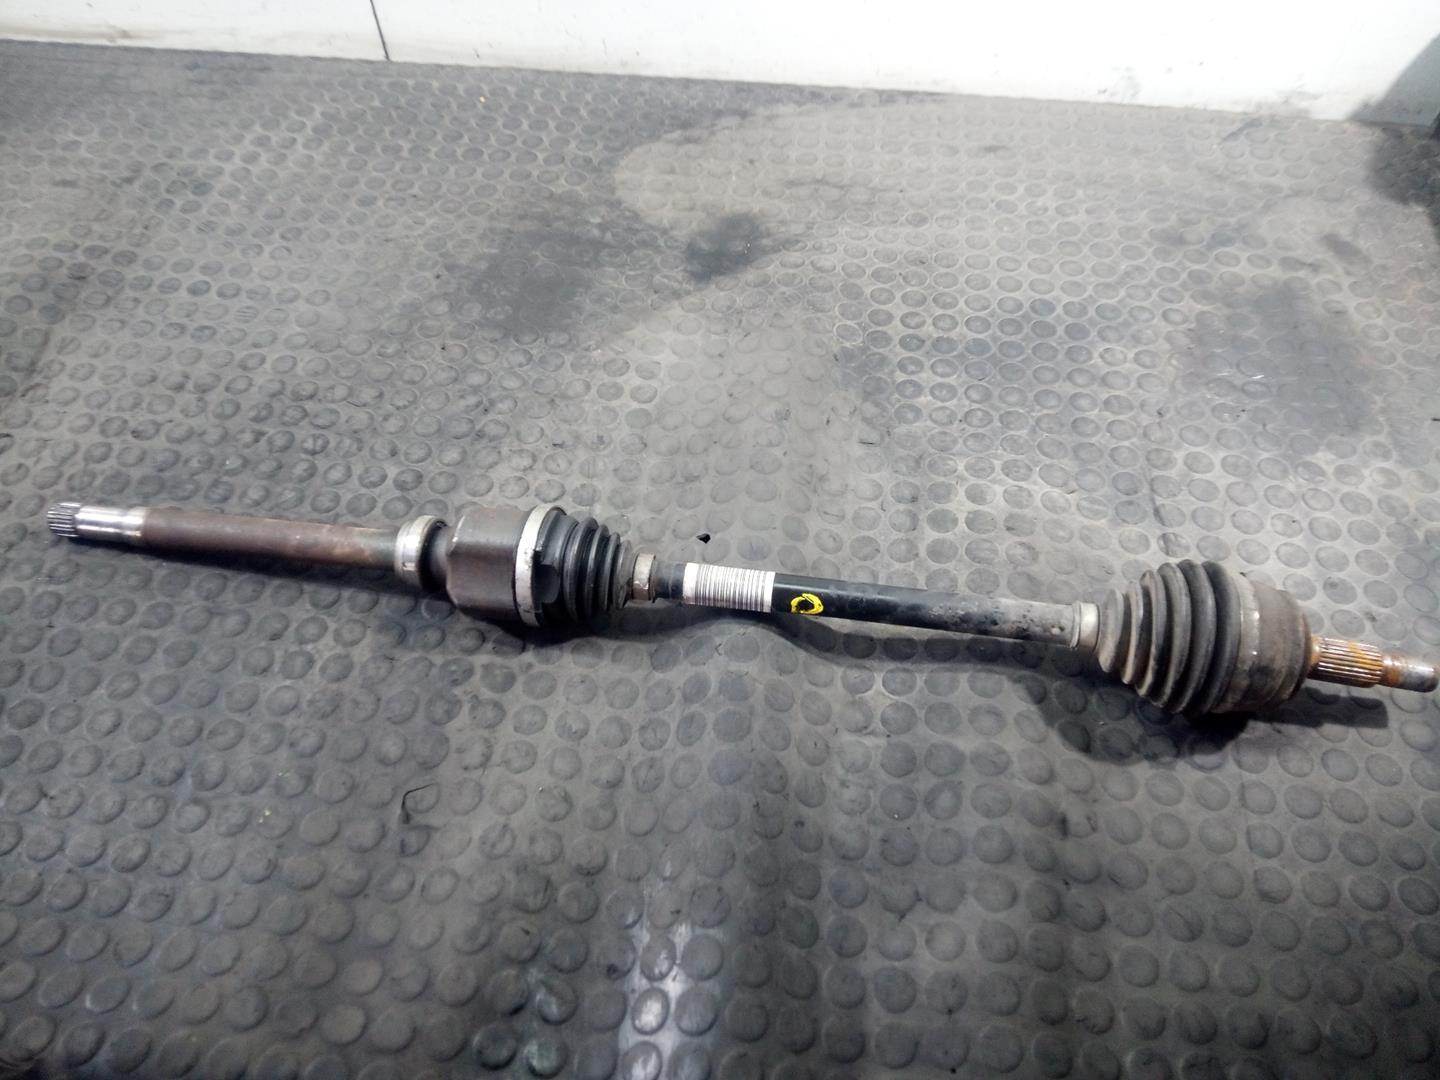 CITROËN C4 Picasso 2 generation (2013-2018) Front Right Driveshaft 9809528380, P1-A6-22 18717216